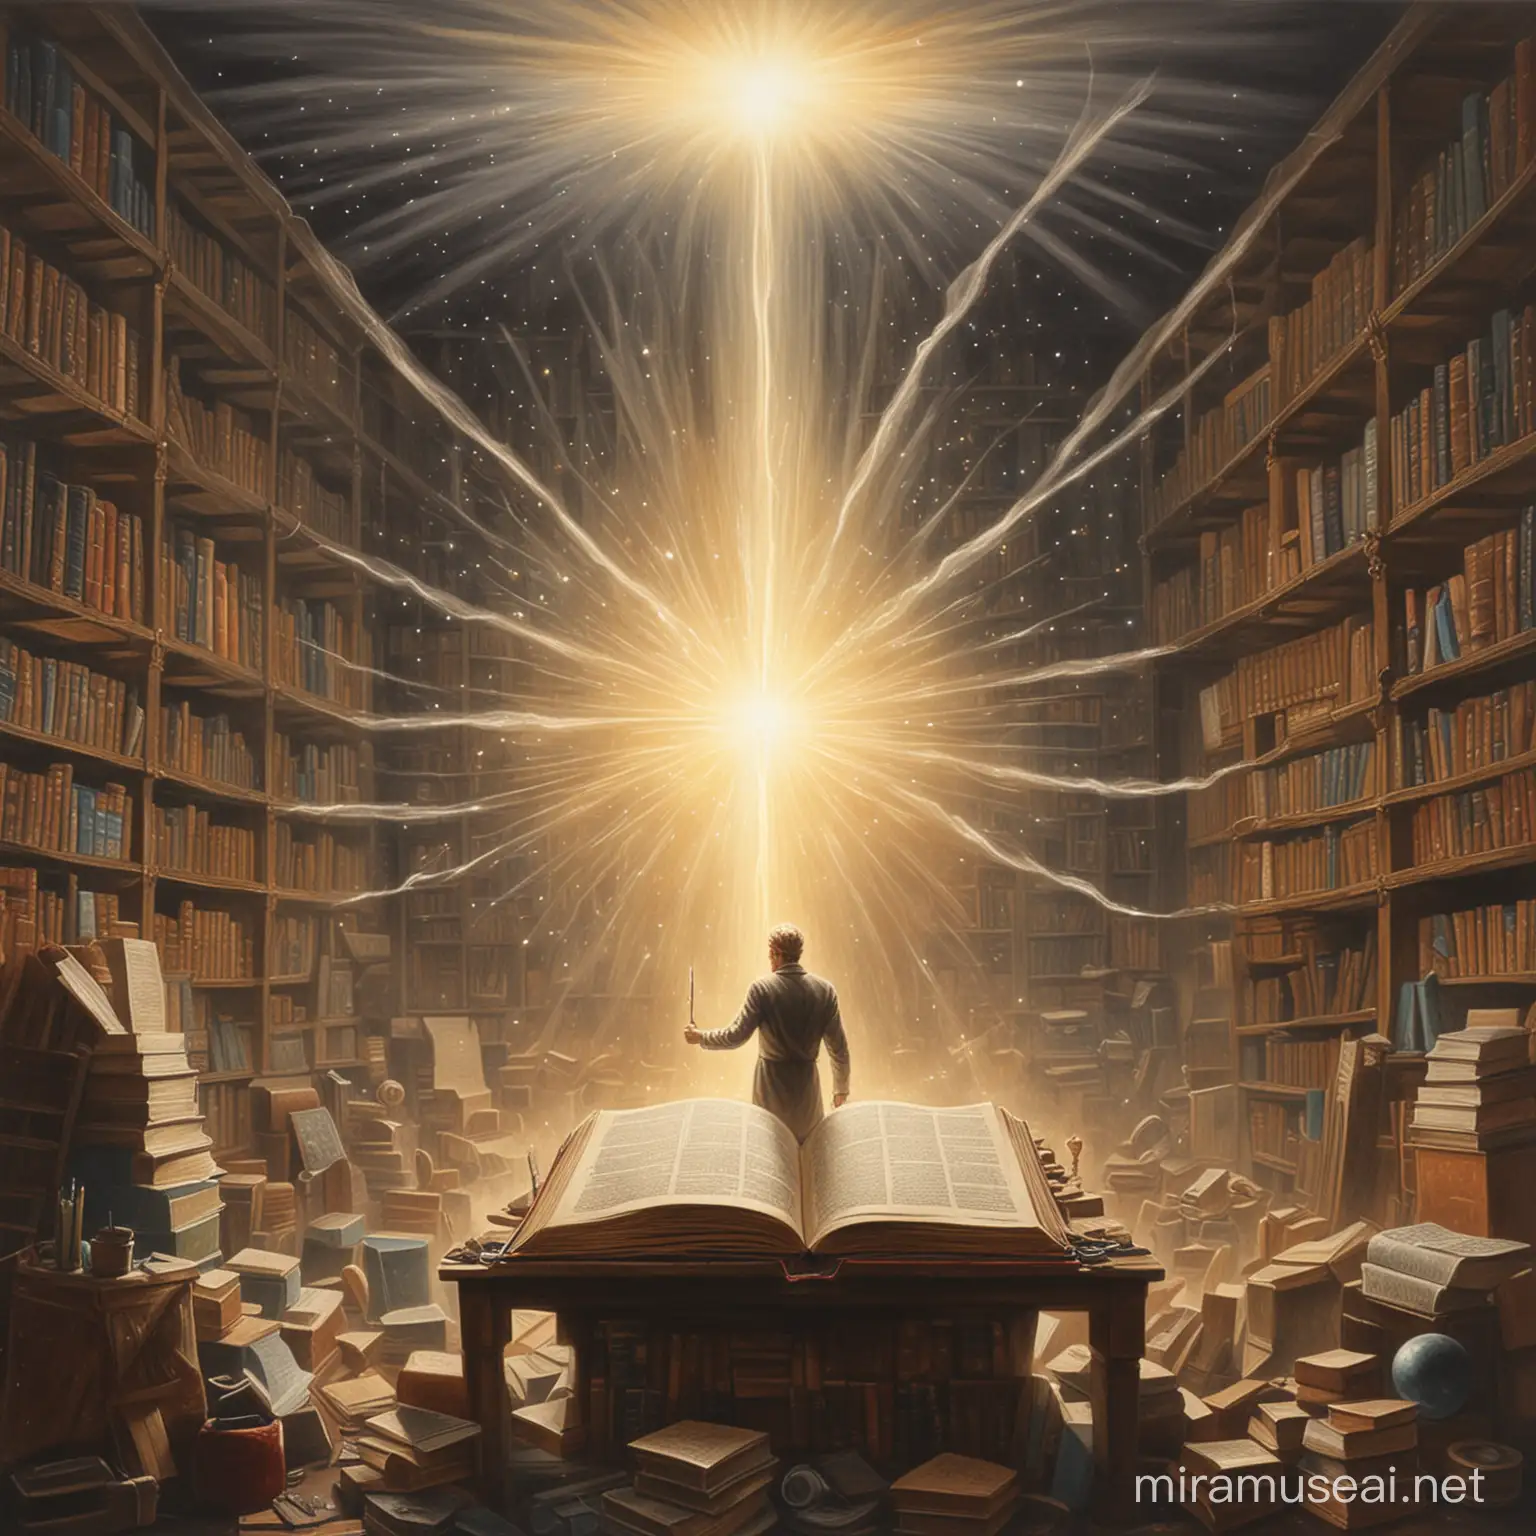 A painting drawing about knowledge and light